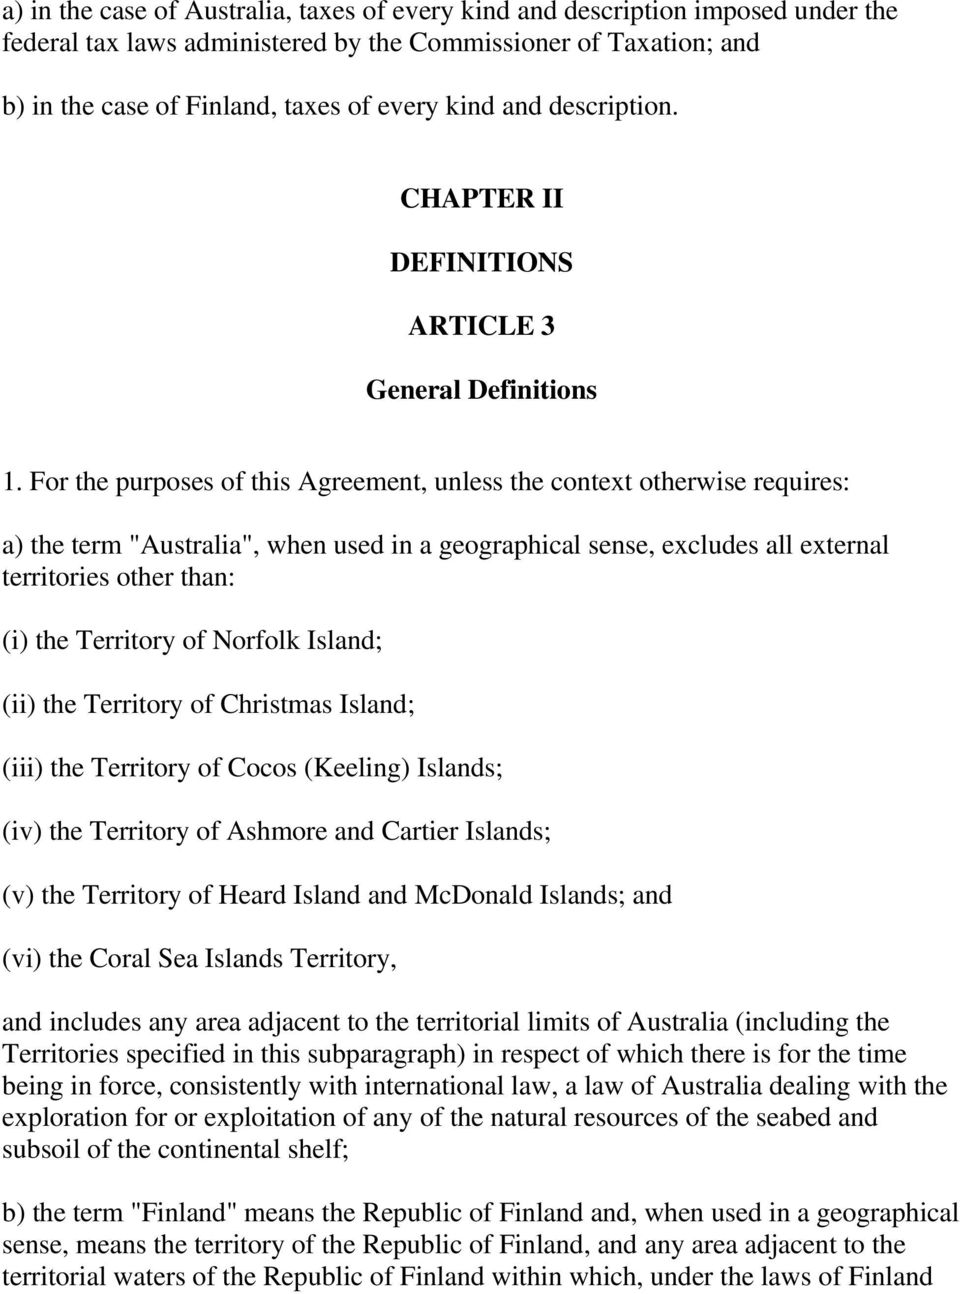 For the purposes of this Agreement, unless the context otherwise requires: a) the term "Australia", when used in a geographical sense, excludes all external territories other than: (i) the Territory